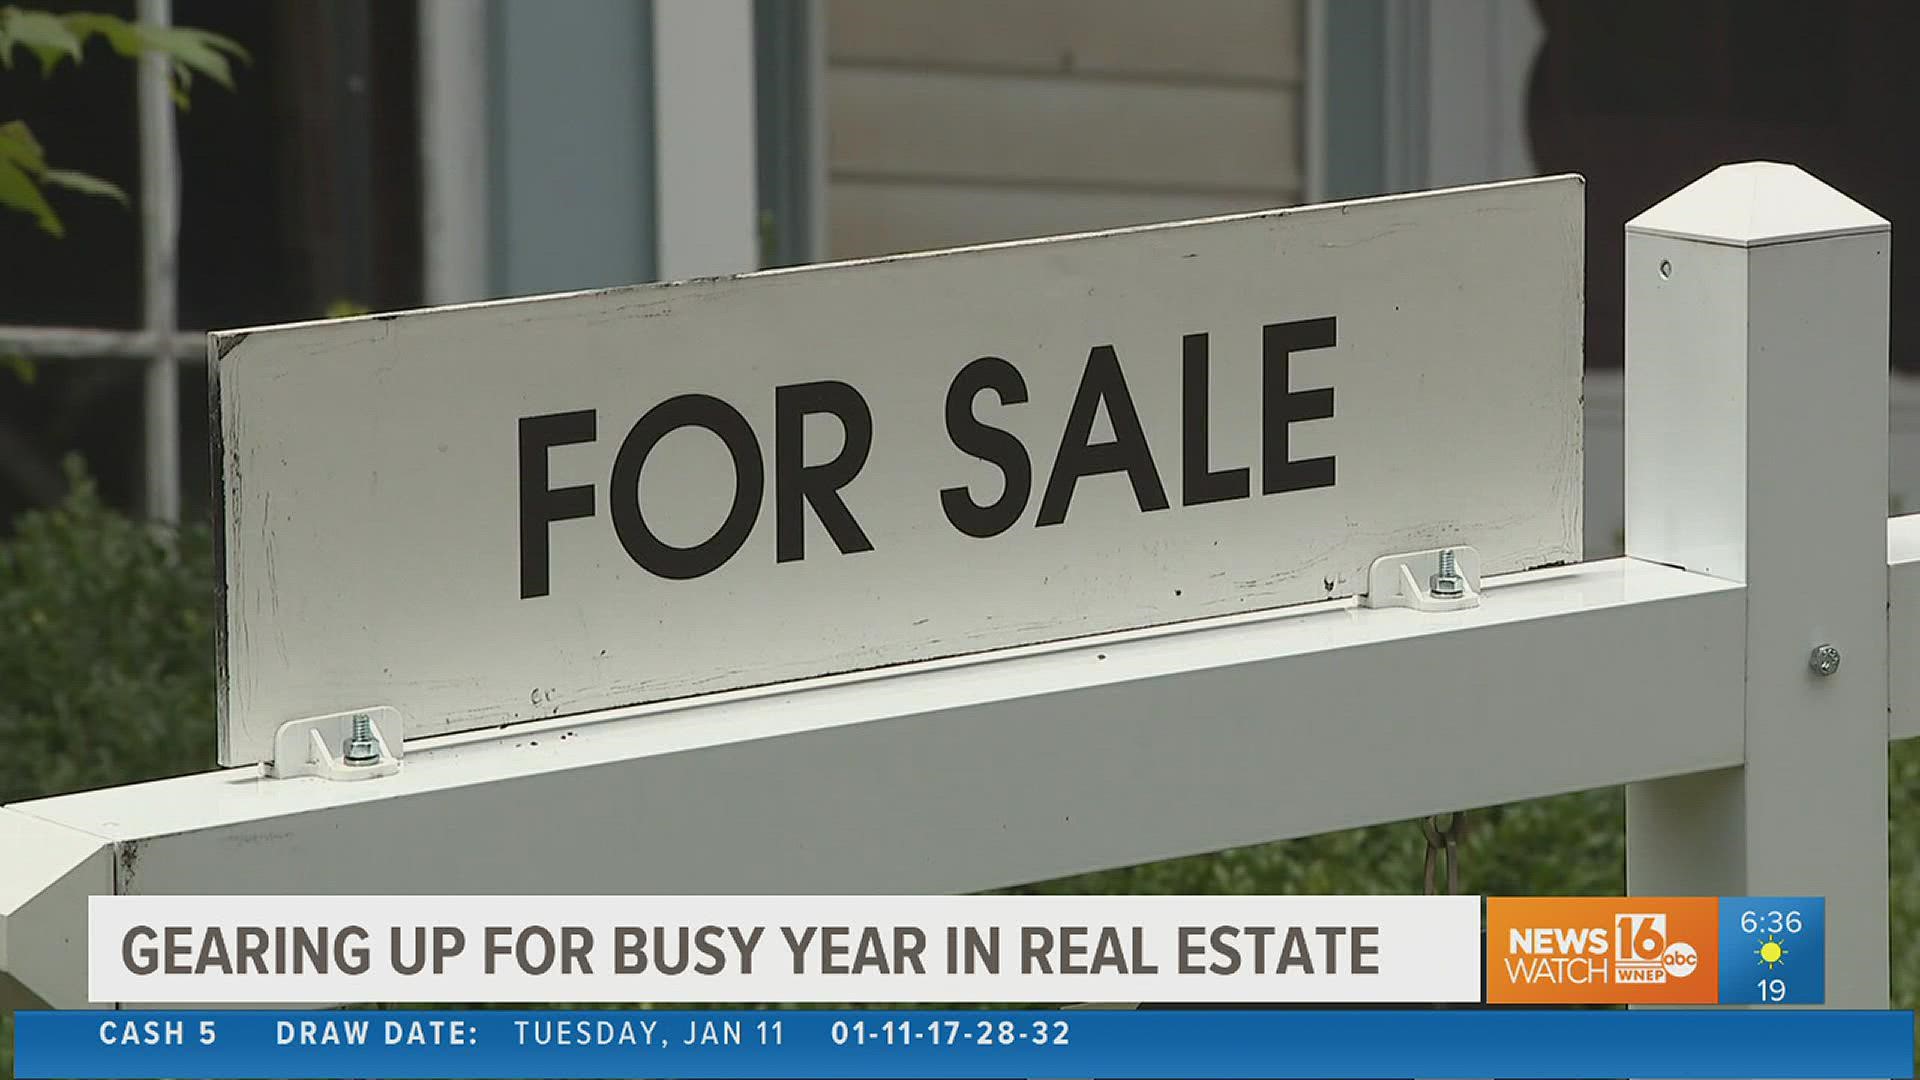 It was another busy year for the housing market. Will that trend continue into the new year? Newswatch 16's Elizabeth Worthington checked it out.